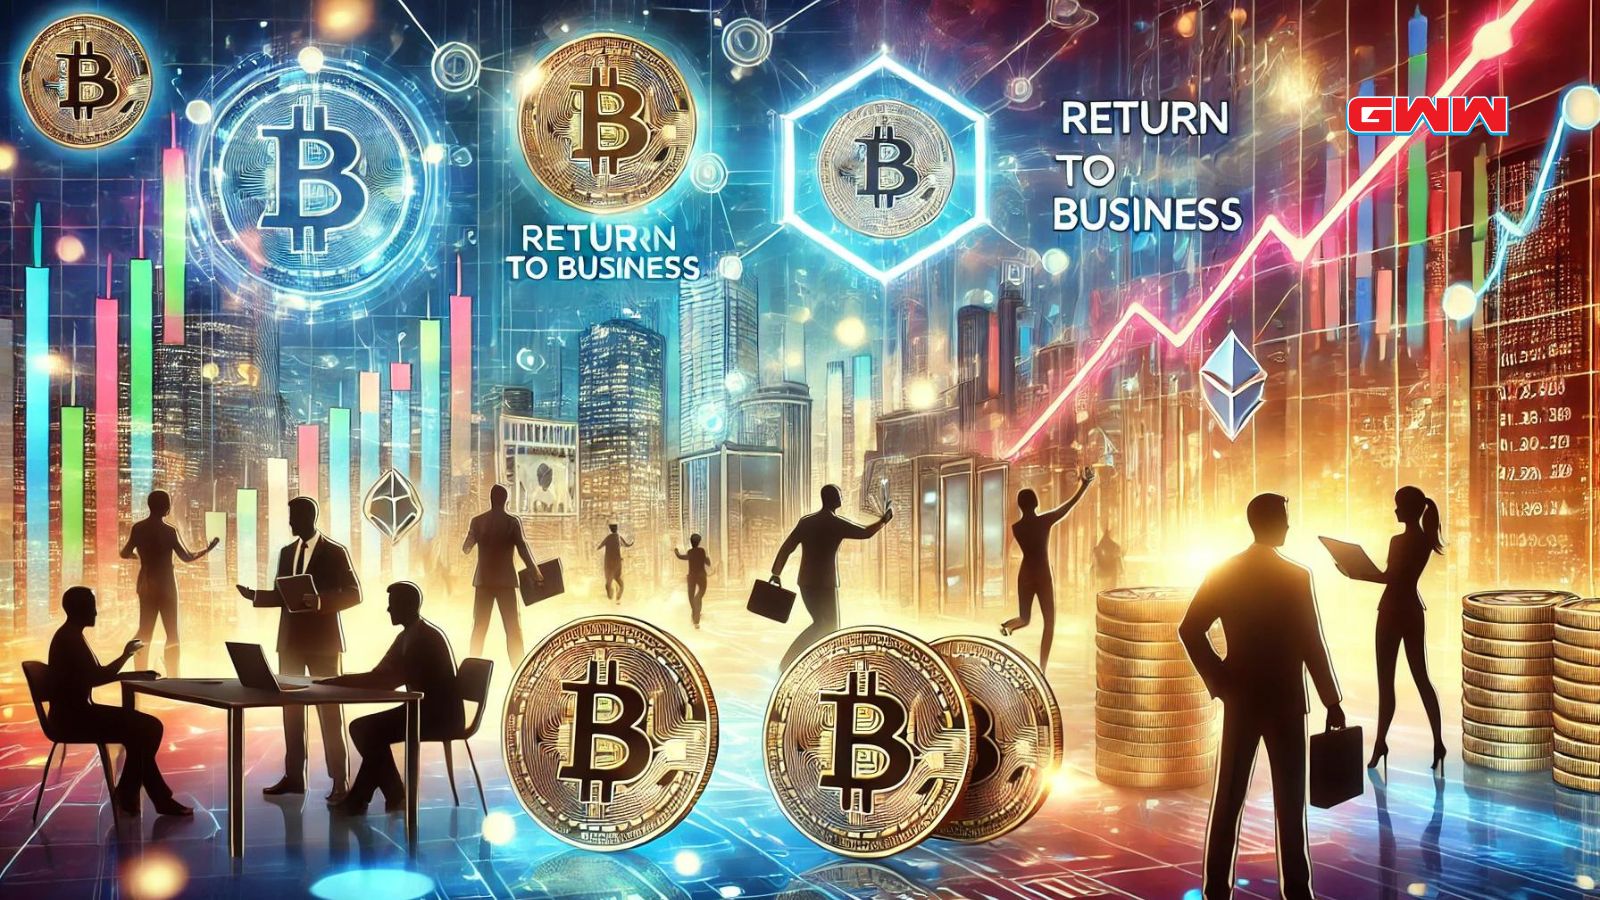 A vibrant scene depicting the return to business for a digital token market after a controversy is resolved